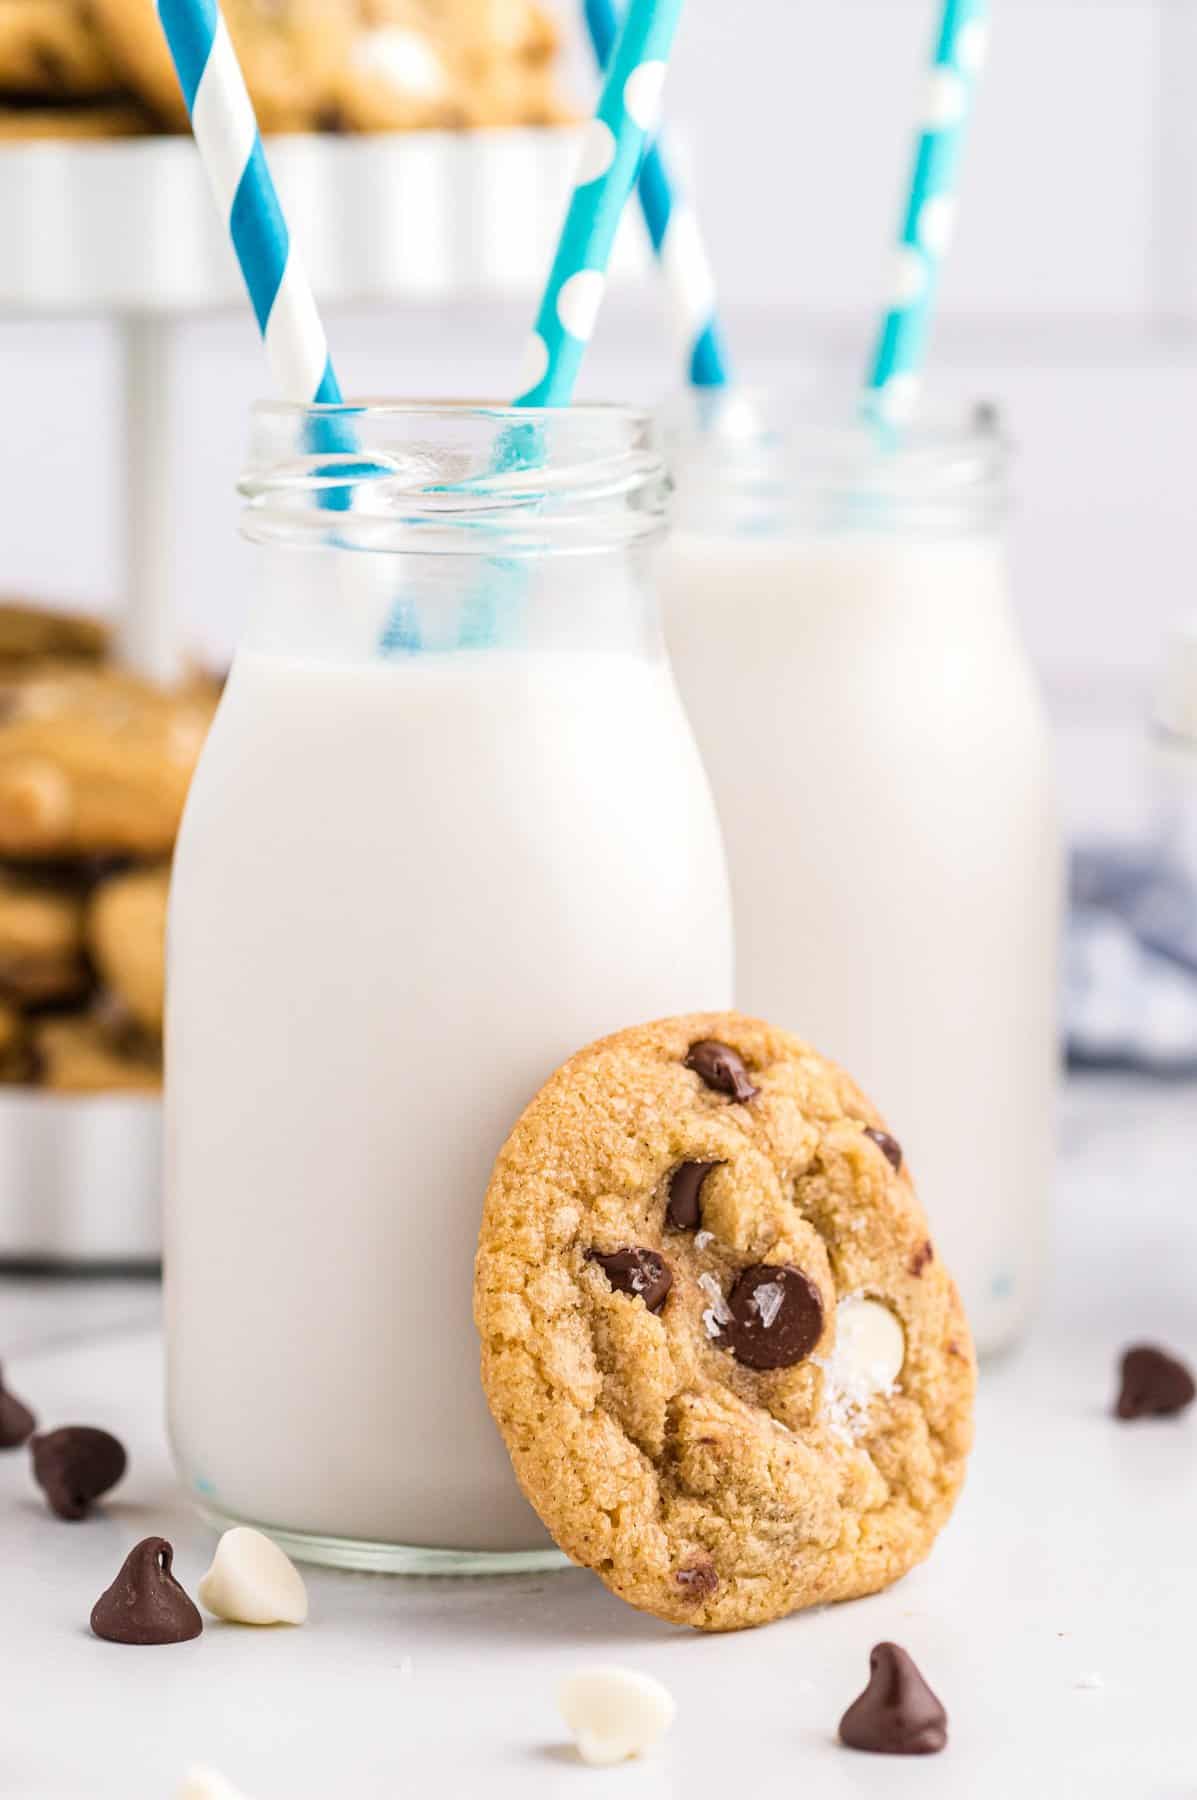 brown butter chocolate chip cookie leaning against a glass of milk with a blue and white straw.